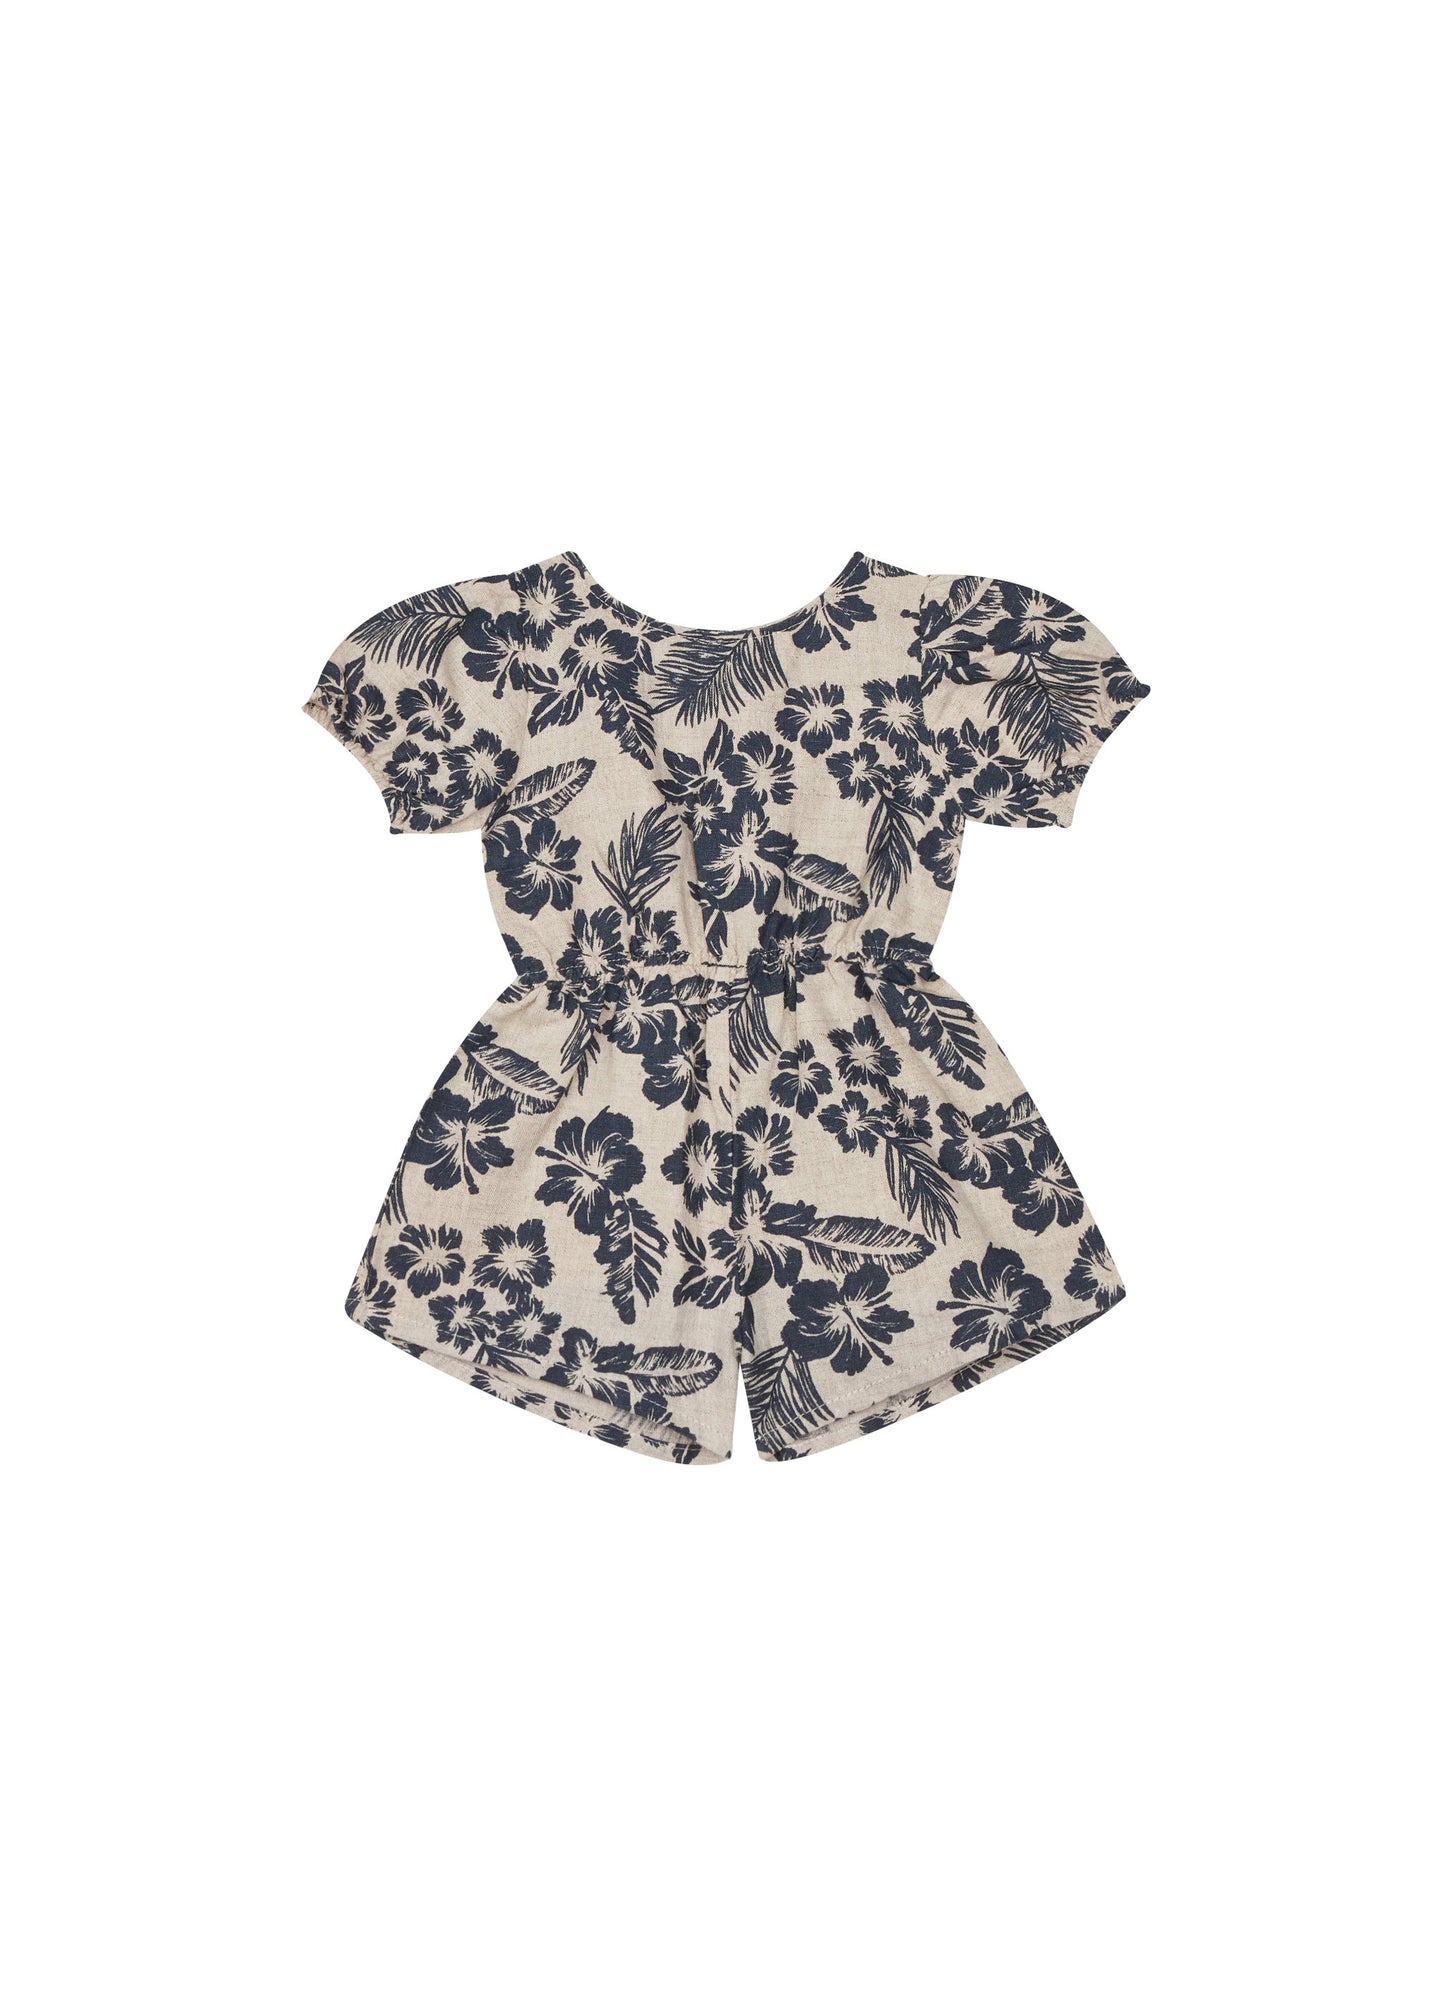 Hibiscus Girl Baby Romper Baby Grows The New Society 